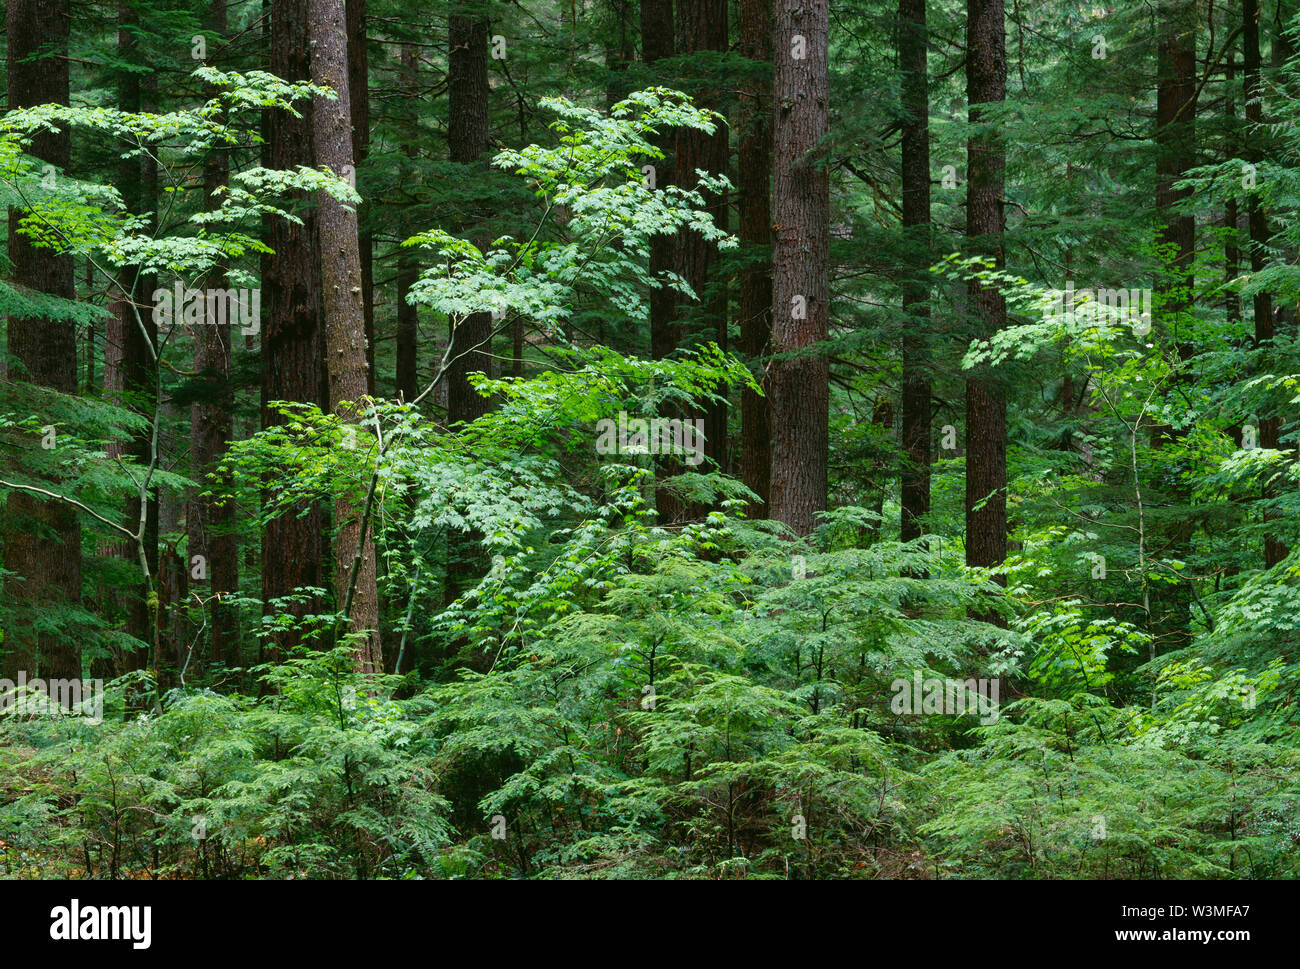 USA, Washington, Mt. Rainier National Park, Forest of Douglas fir and western hemlock with smaller maple and conifers saplings; Ohanepecosh Valley. Stock Photo